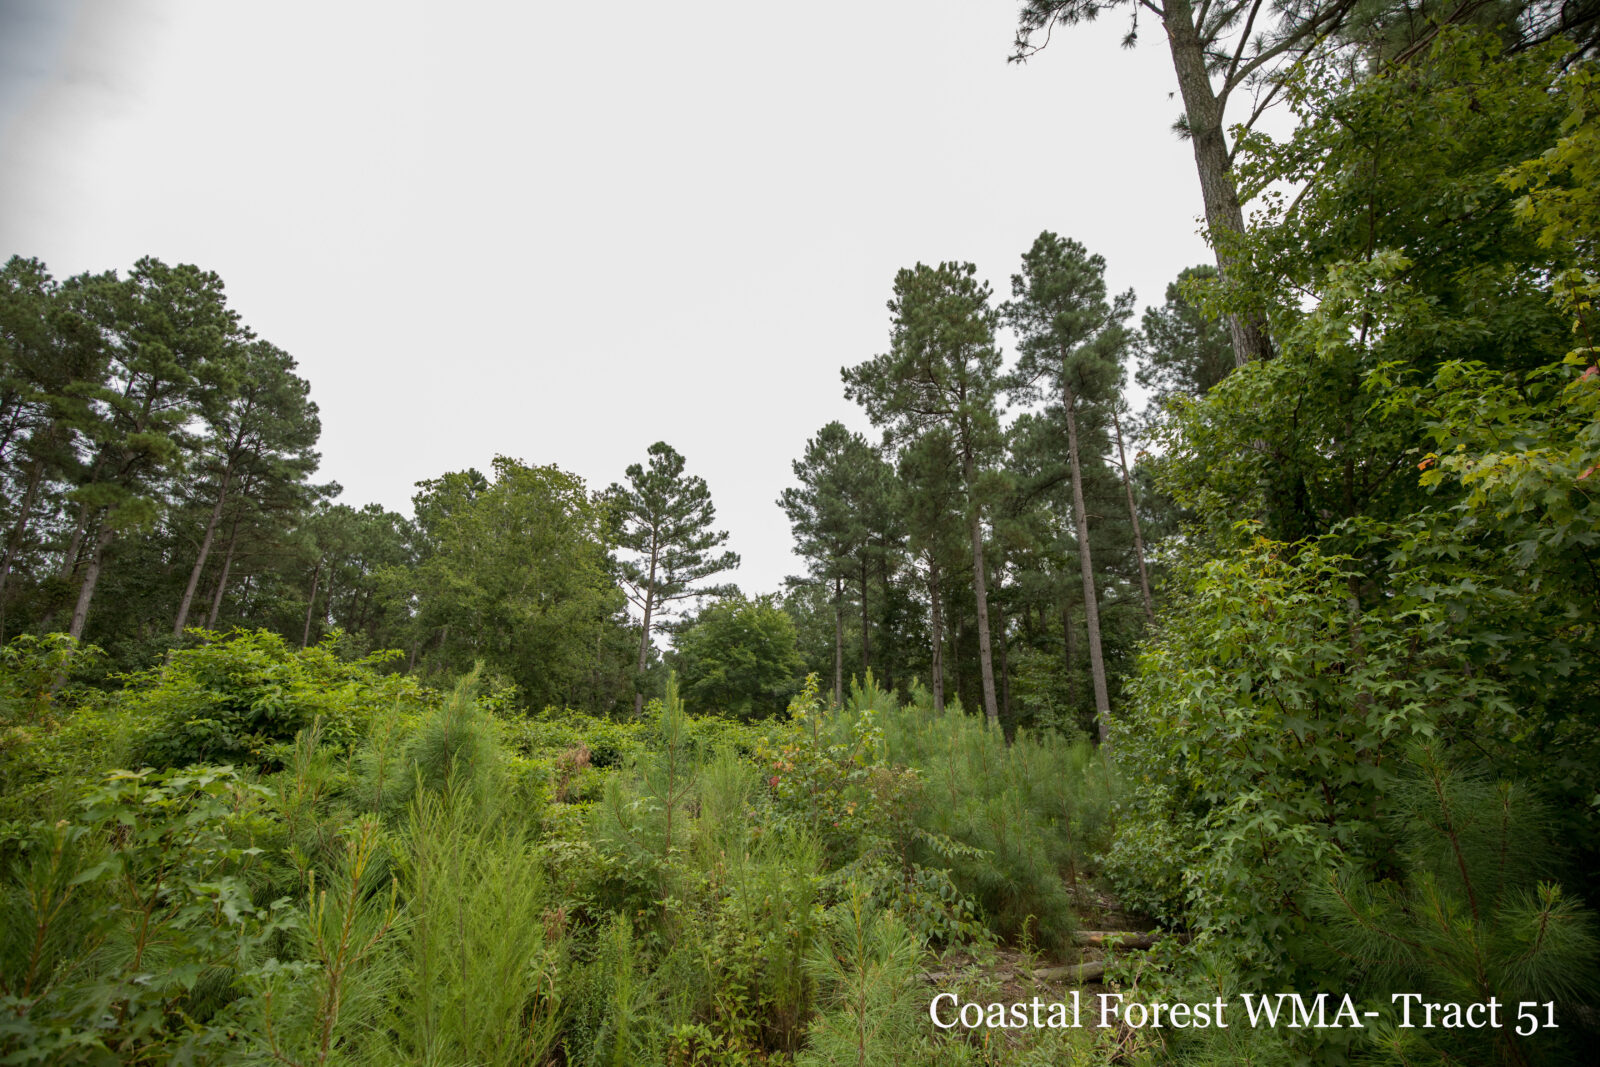 An image of the Coastal Forest WMA